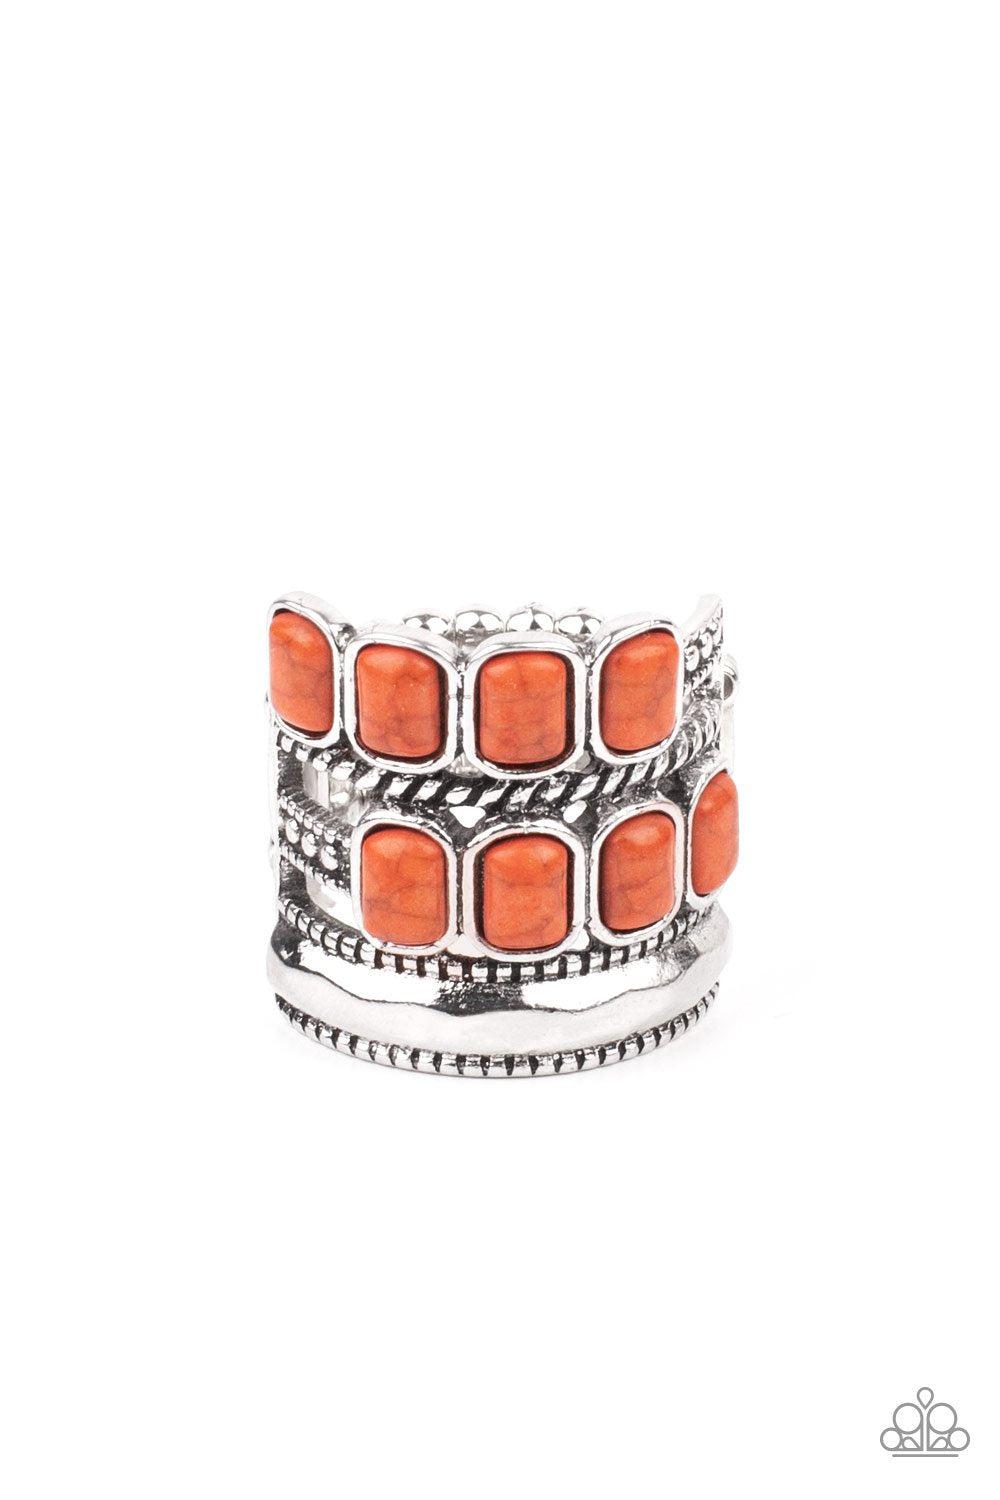 Mojave Monument Orange and Silver Ring - Paparazzi Accessories 2021 Convention Exclusive- lightbox - CarasShop.com - $5 Jewelry by Cara Jewels